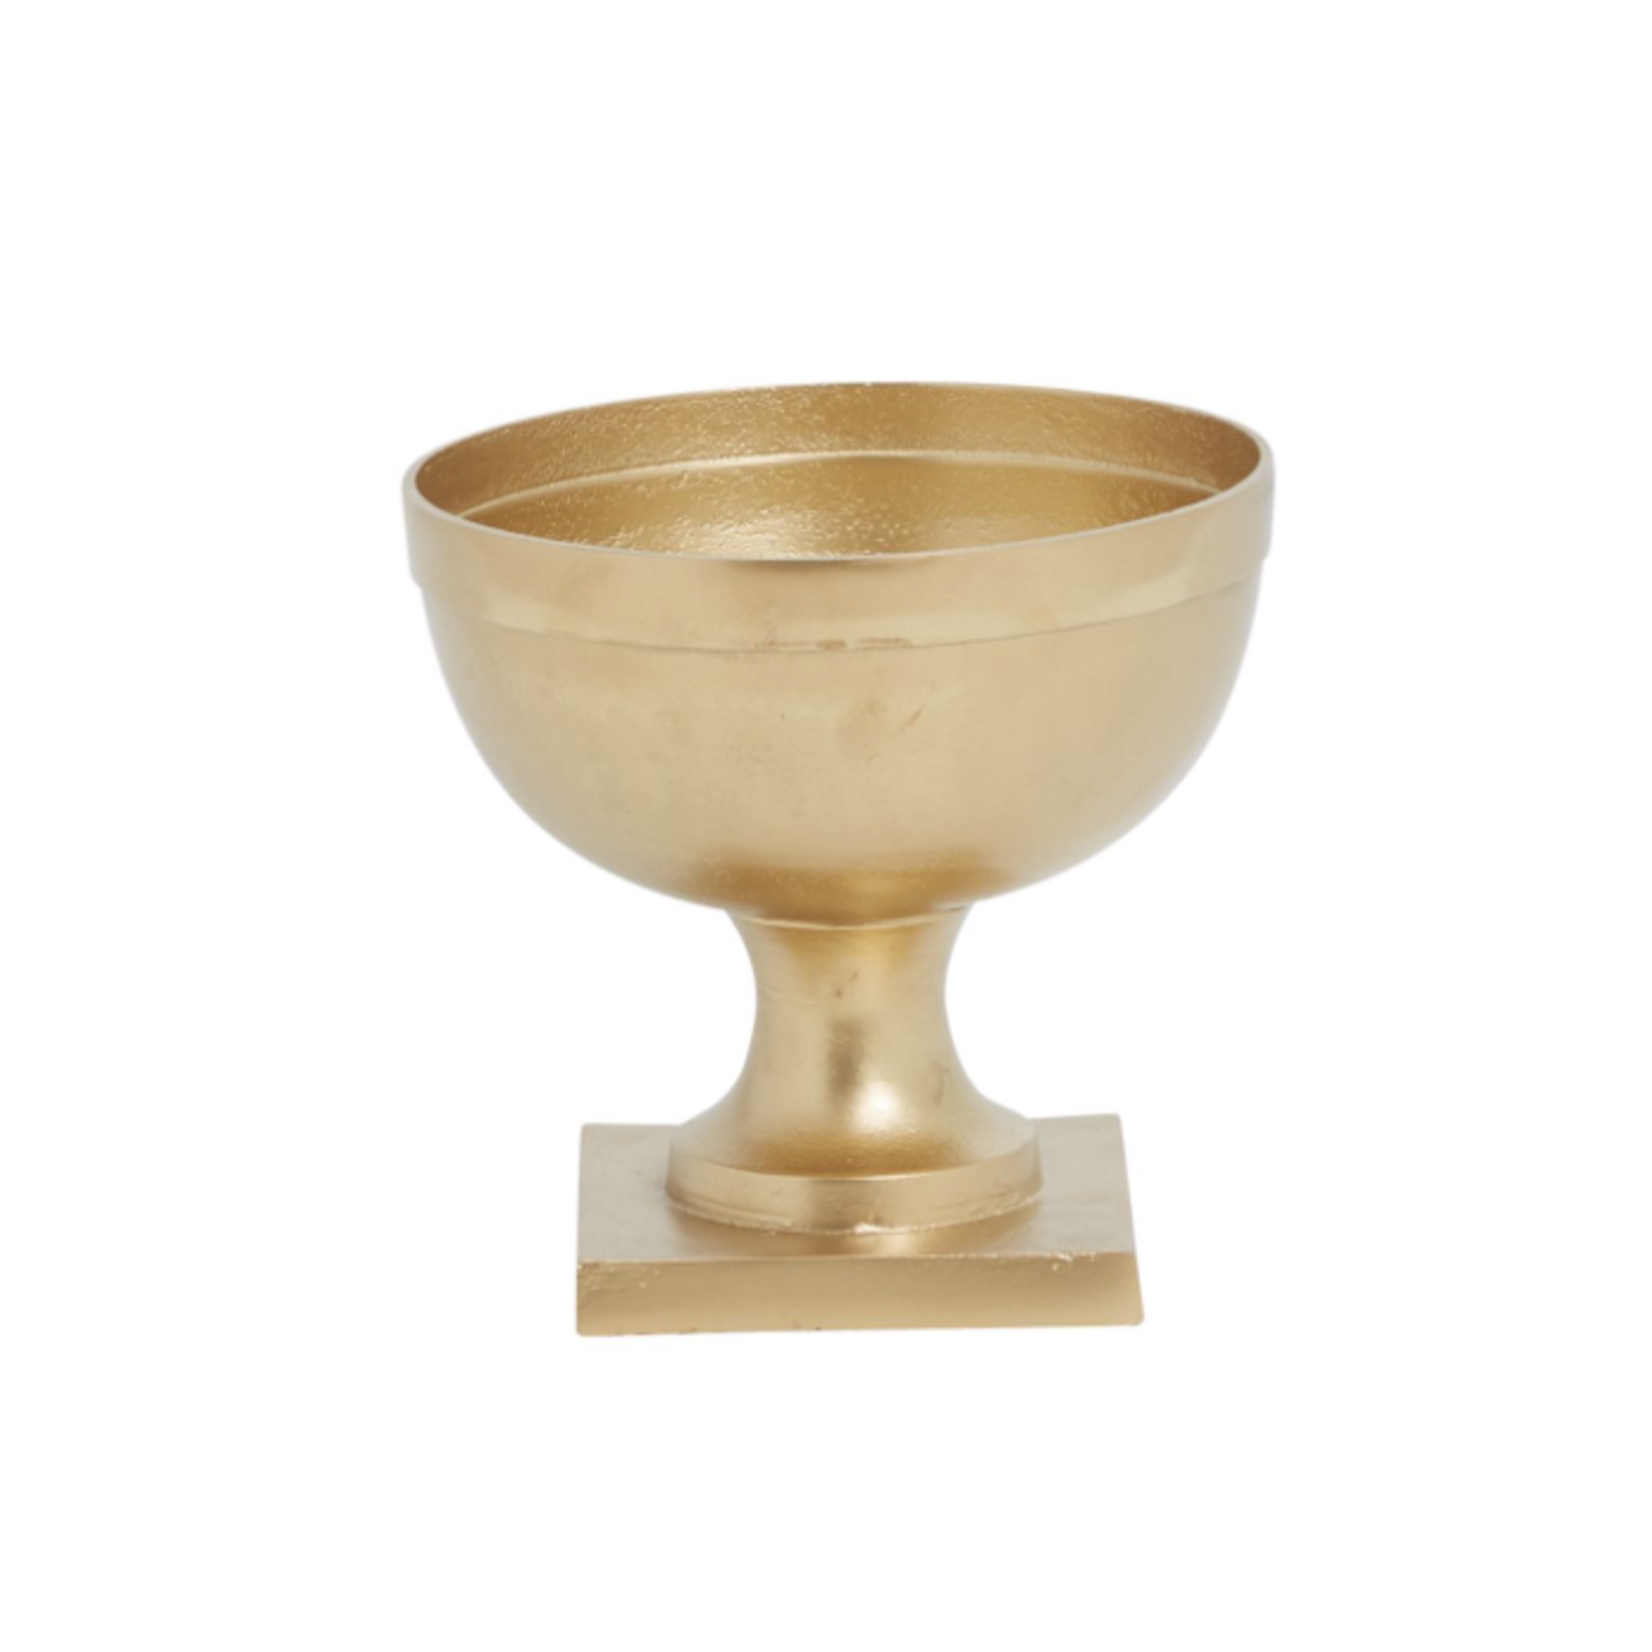 9.5"H X 10" GOLD CASTON COMPOTE COLLECTION